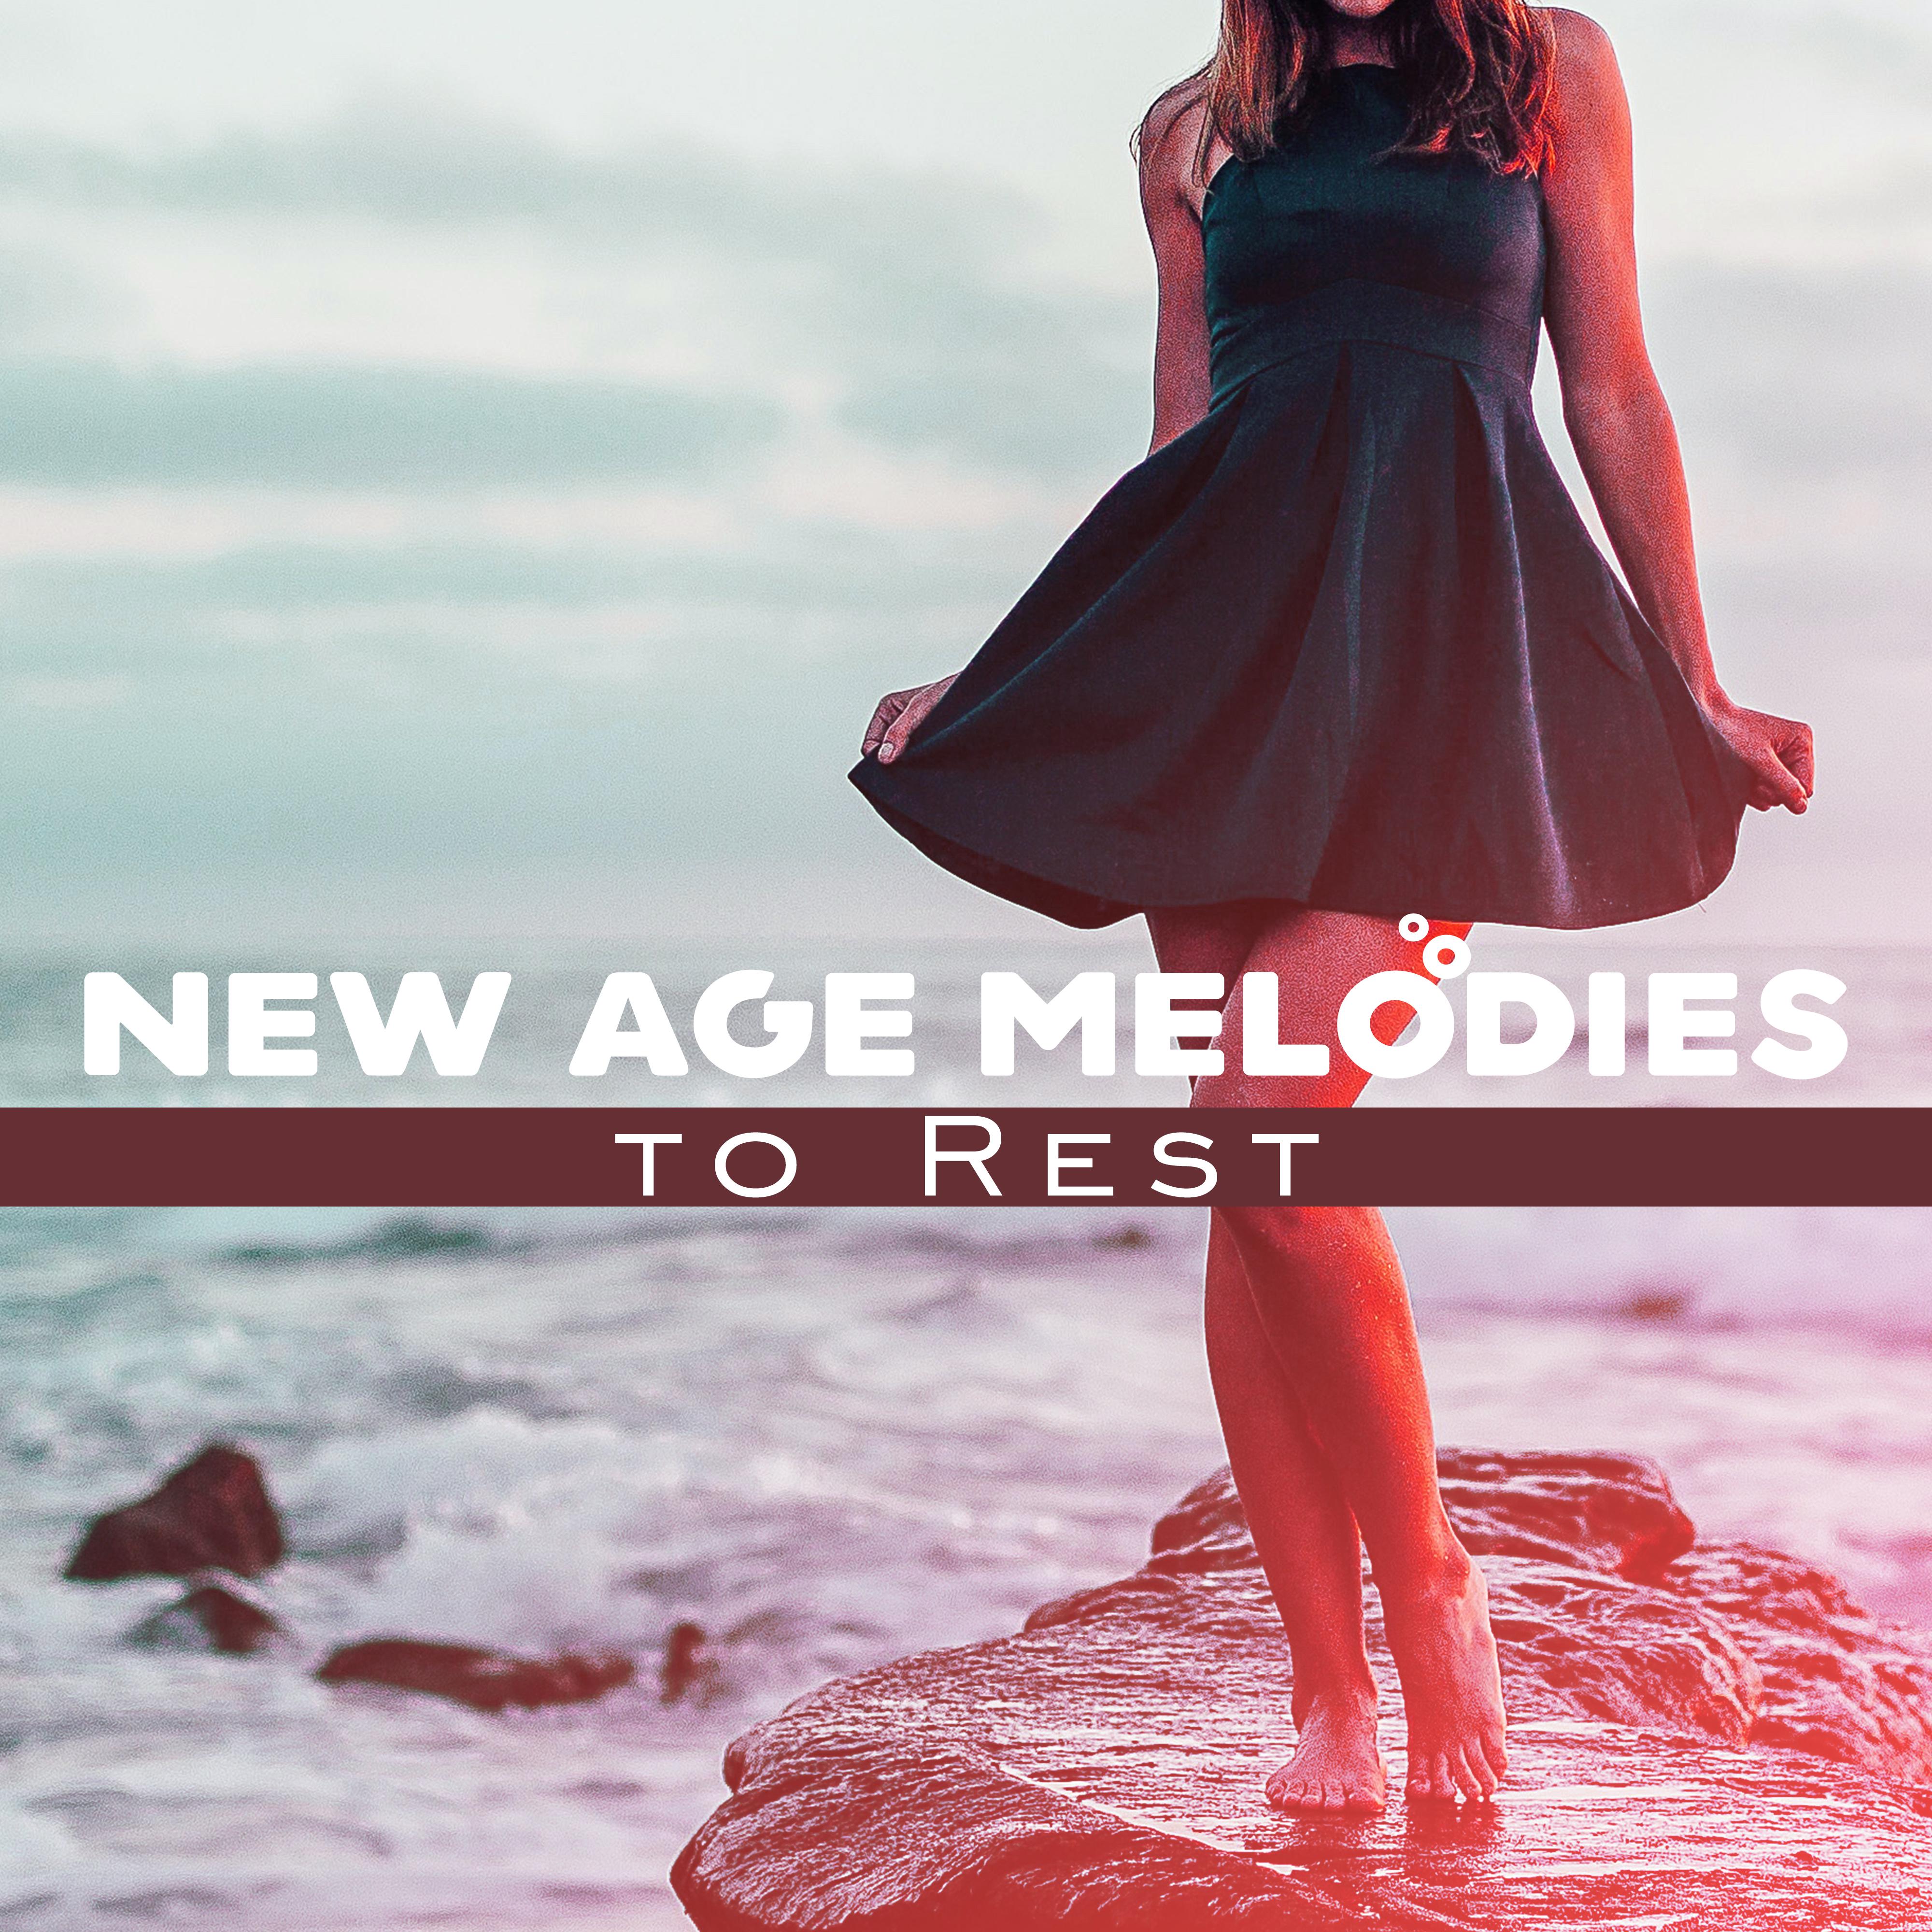 New Age Melodies to Rest  Soothing Sounds, Rest a Bit, Relaxing Music to Calm Down, Mind Peace